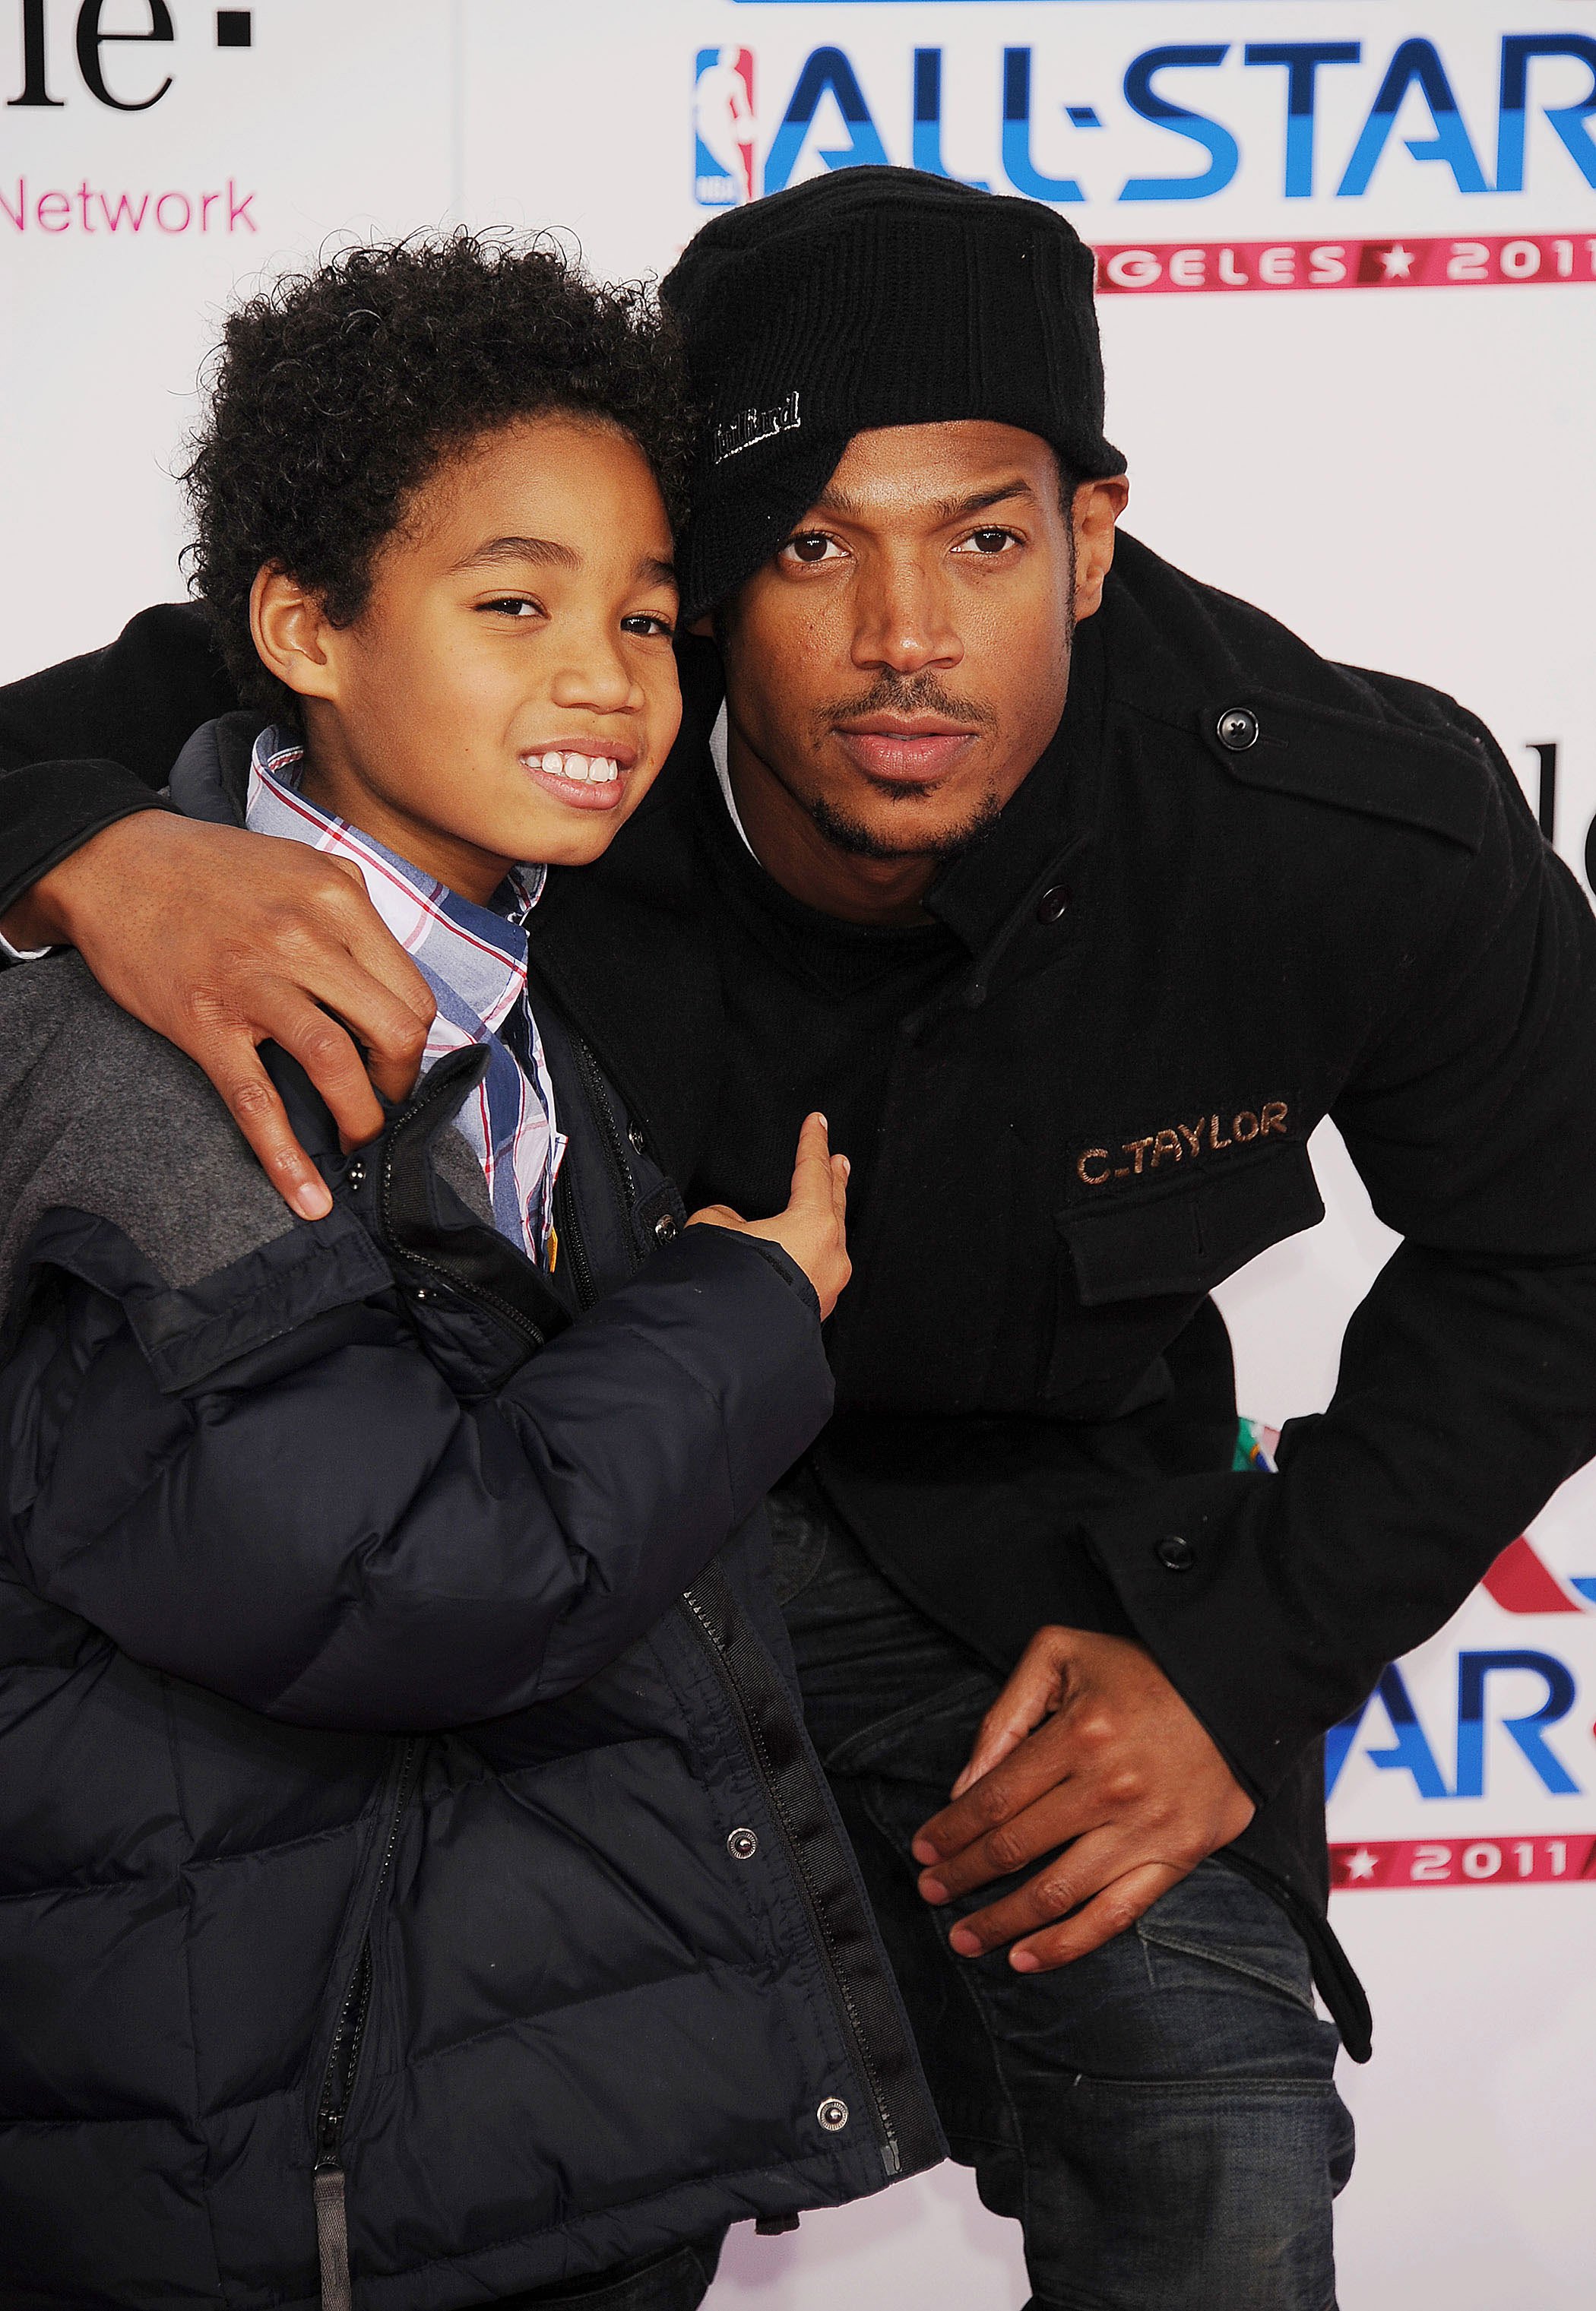 Marlon Wayans and Shawn Howell Wayans at the 2011 NBA All-Star Game in Los Angeles, California, on February 20, 2011 | Source: Getty Images 